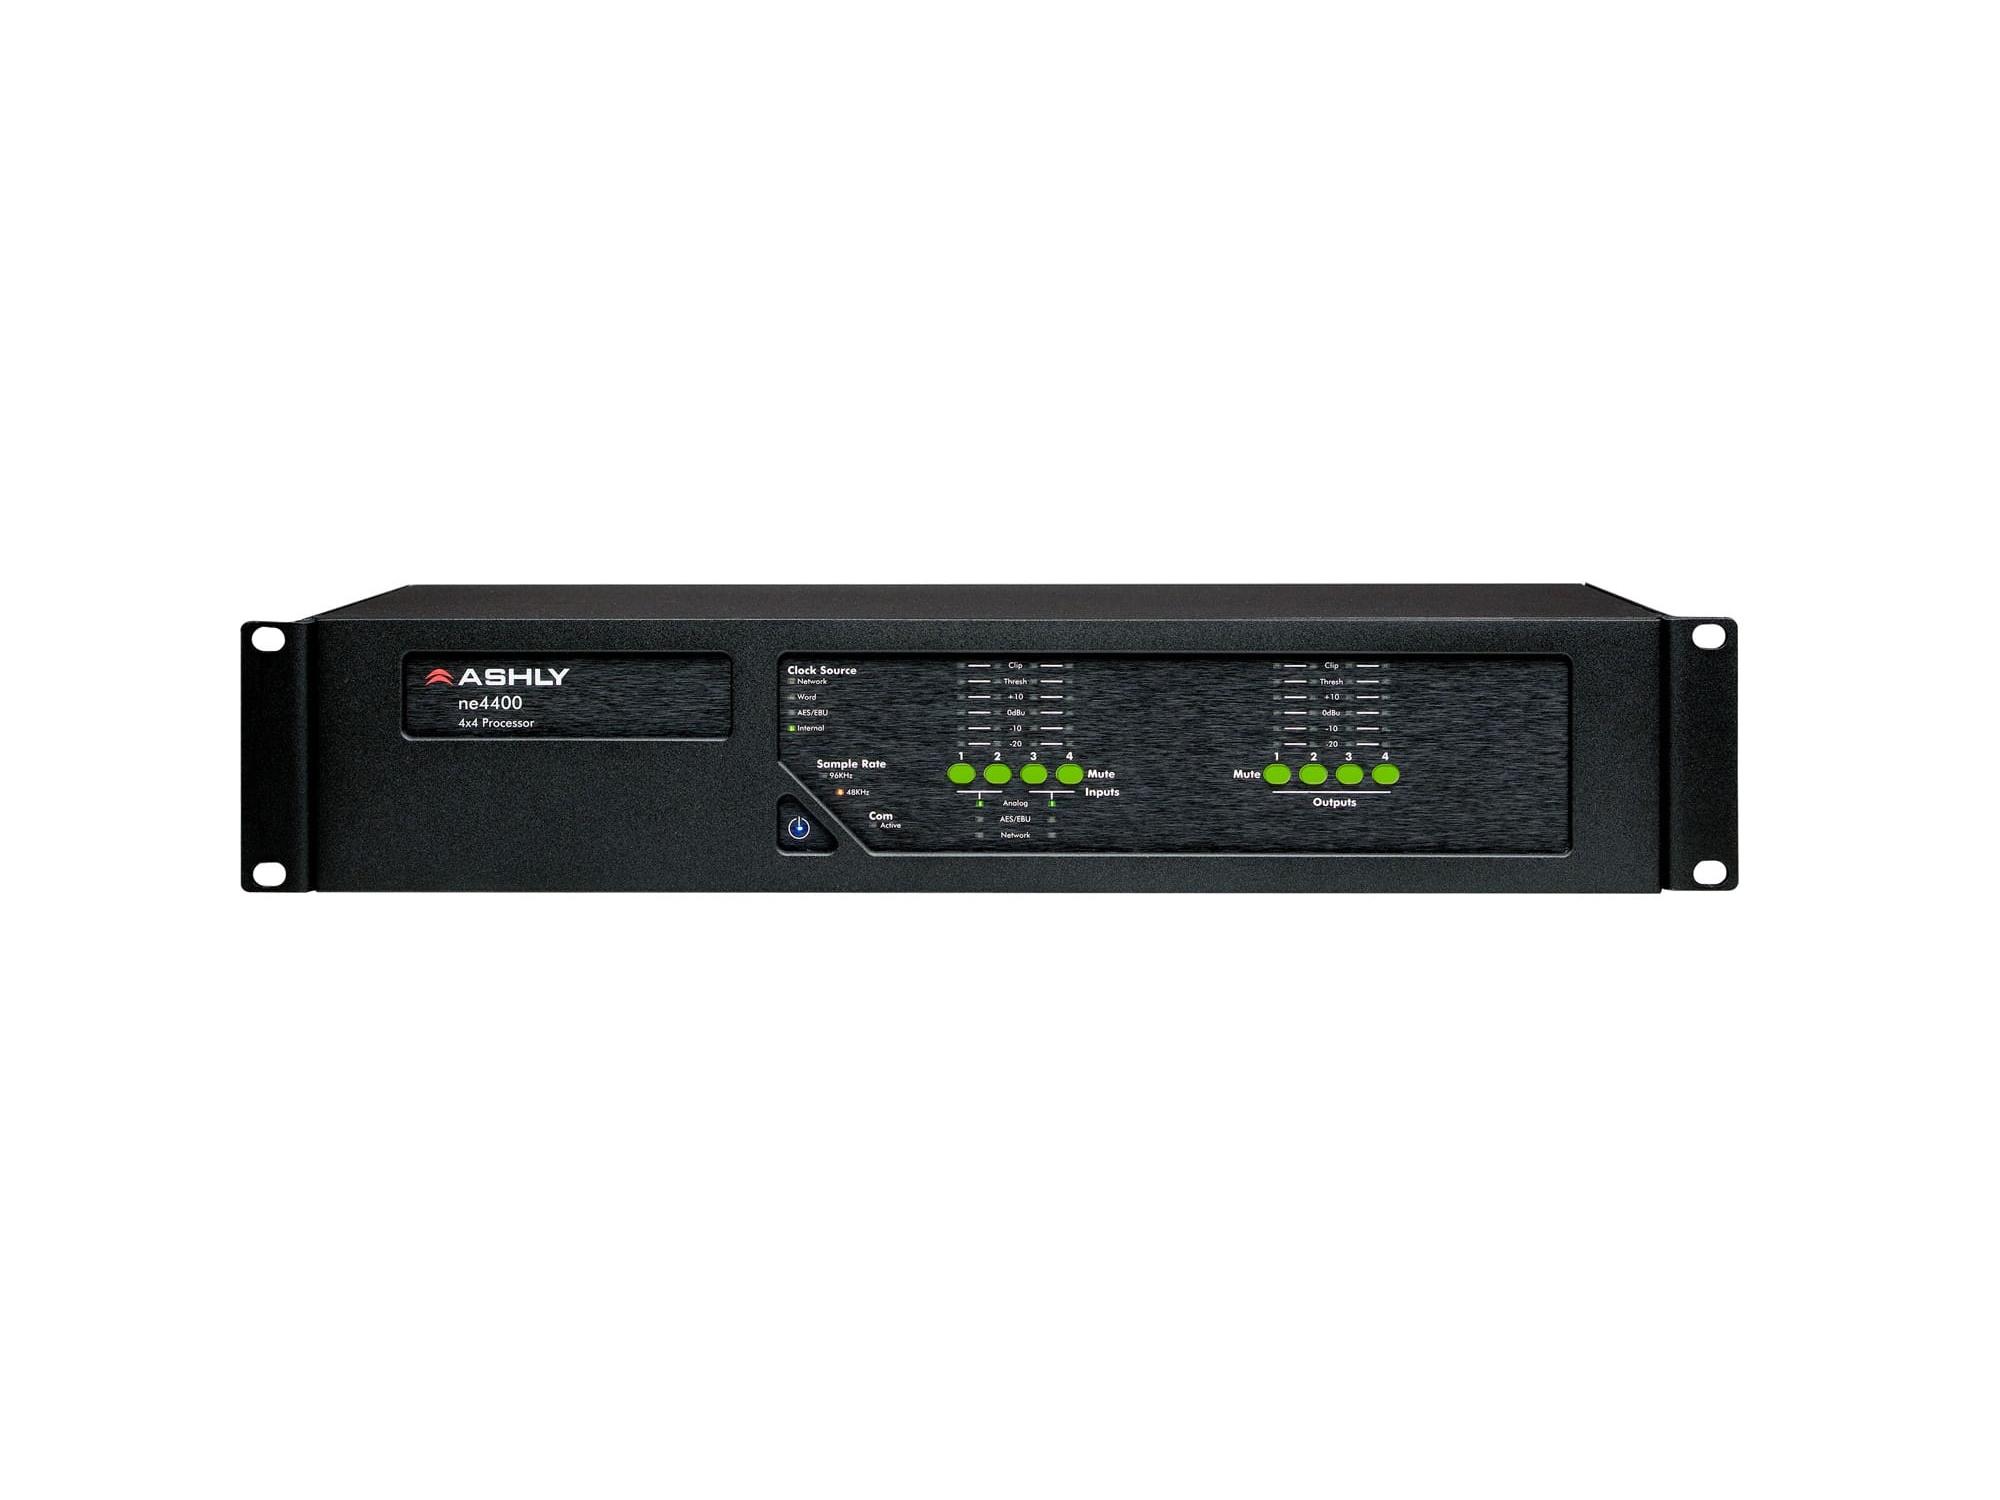 ne4400t 4x4 Protea DSP Audio System Processor with Dante Option card by Ashly